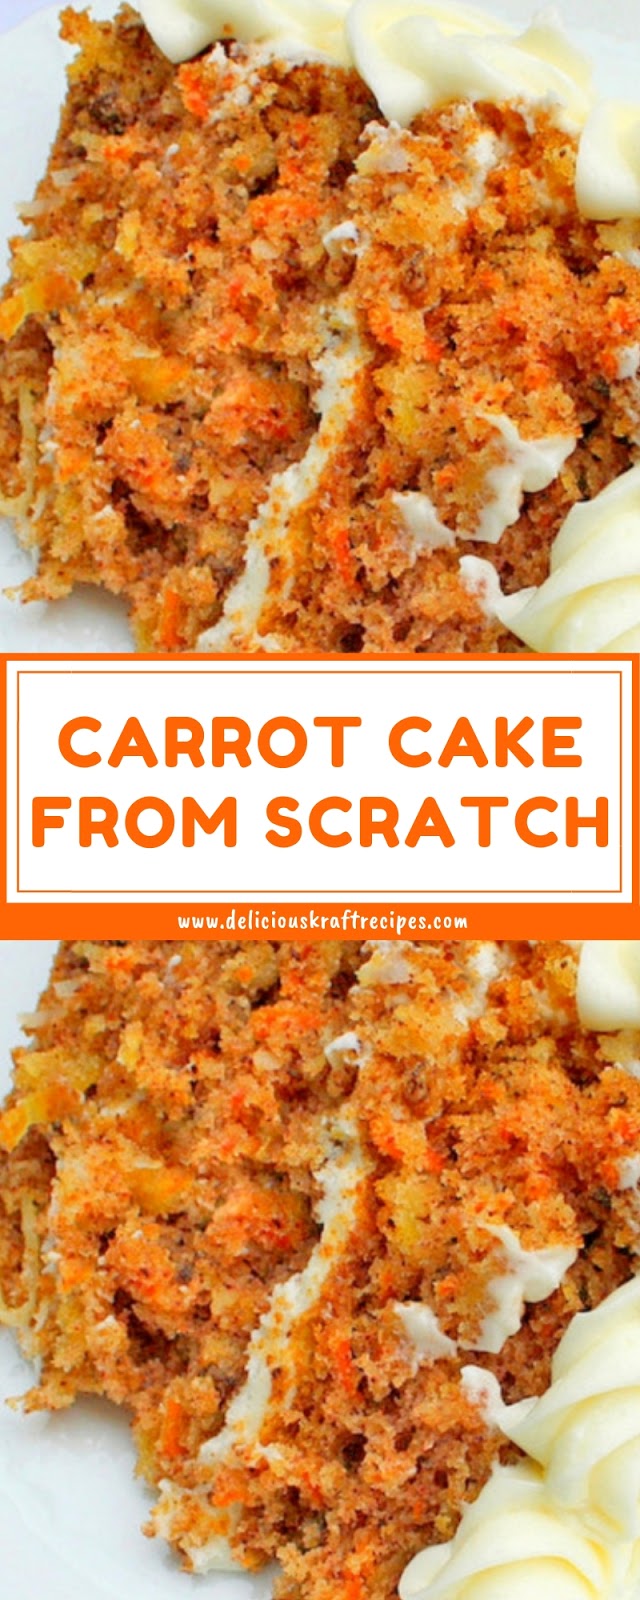 CARROT CAKE FROM SCRATCH